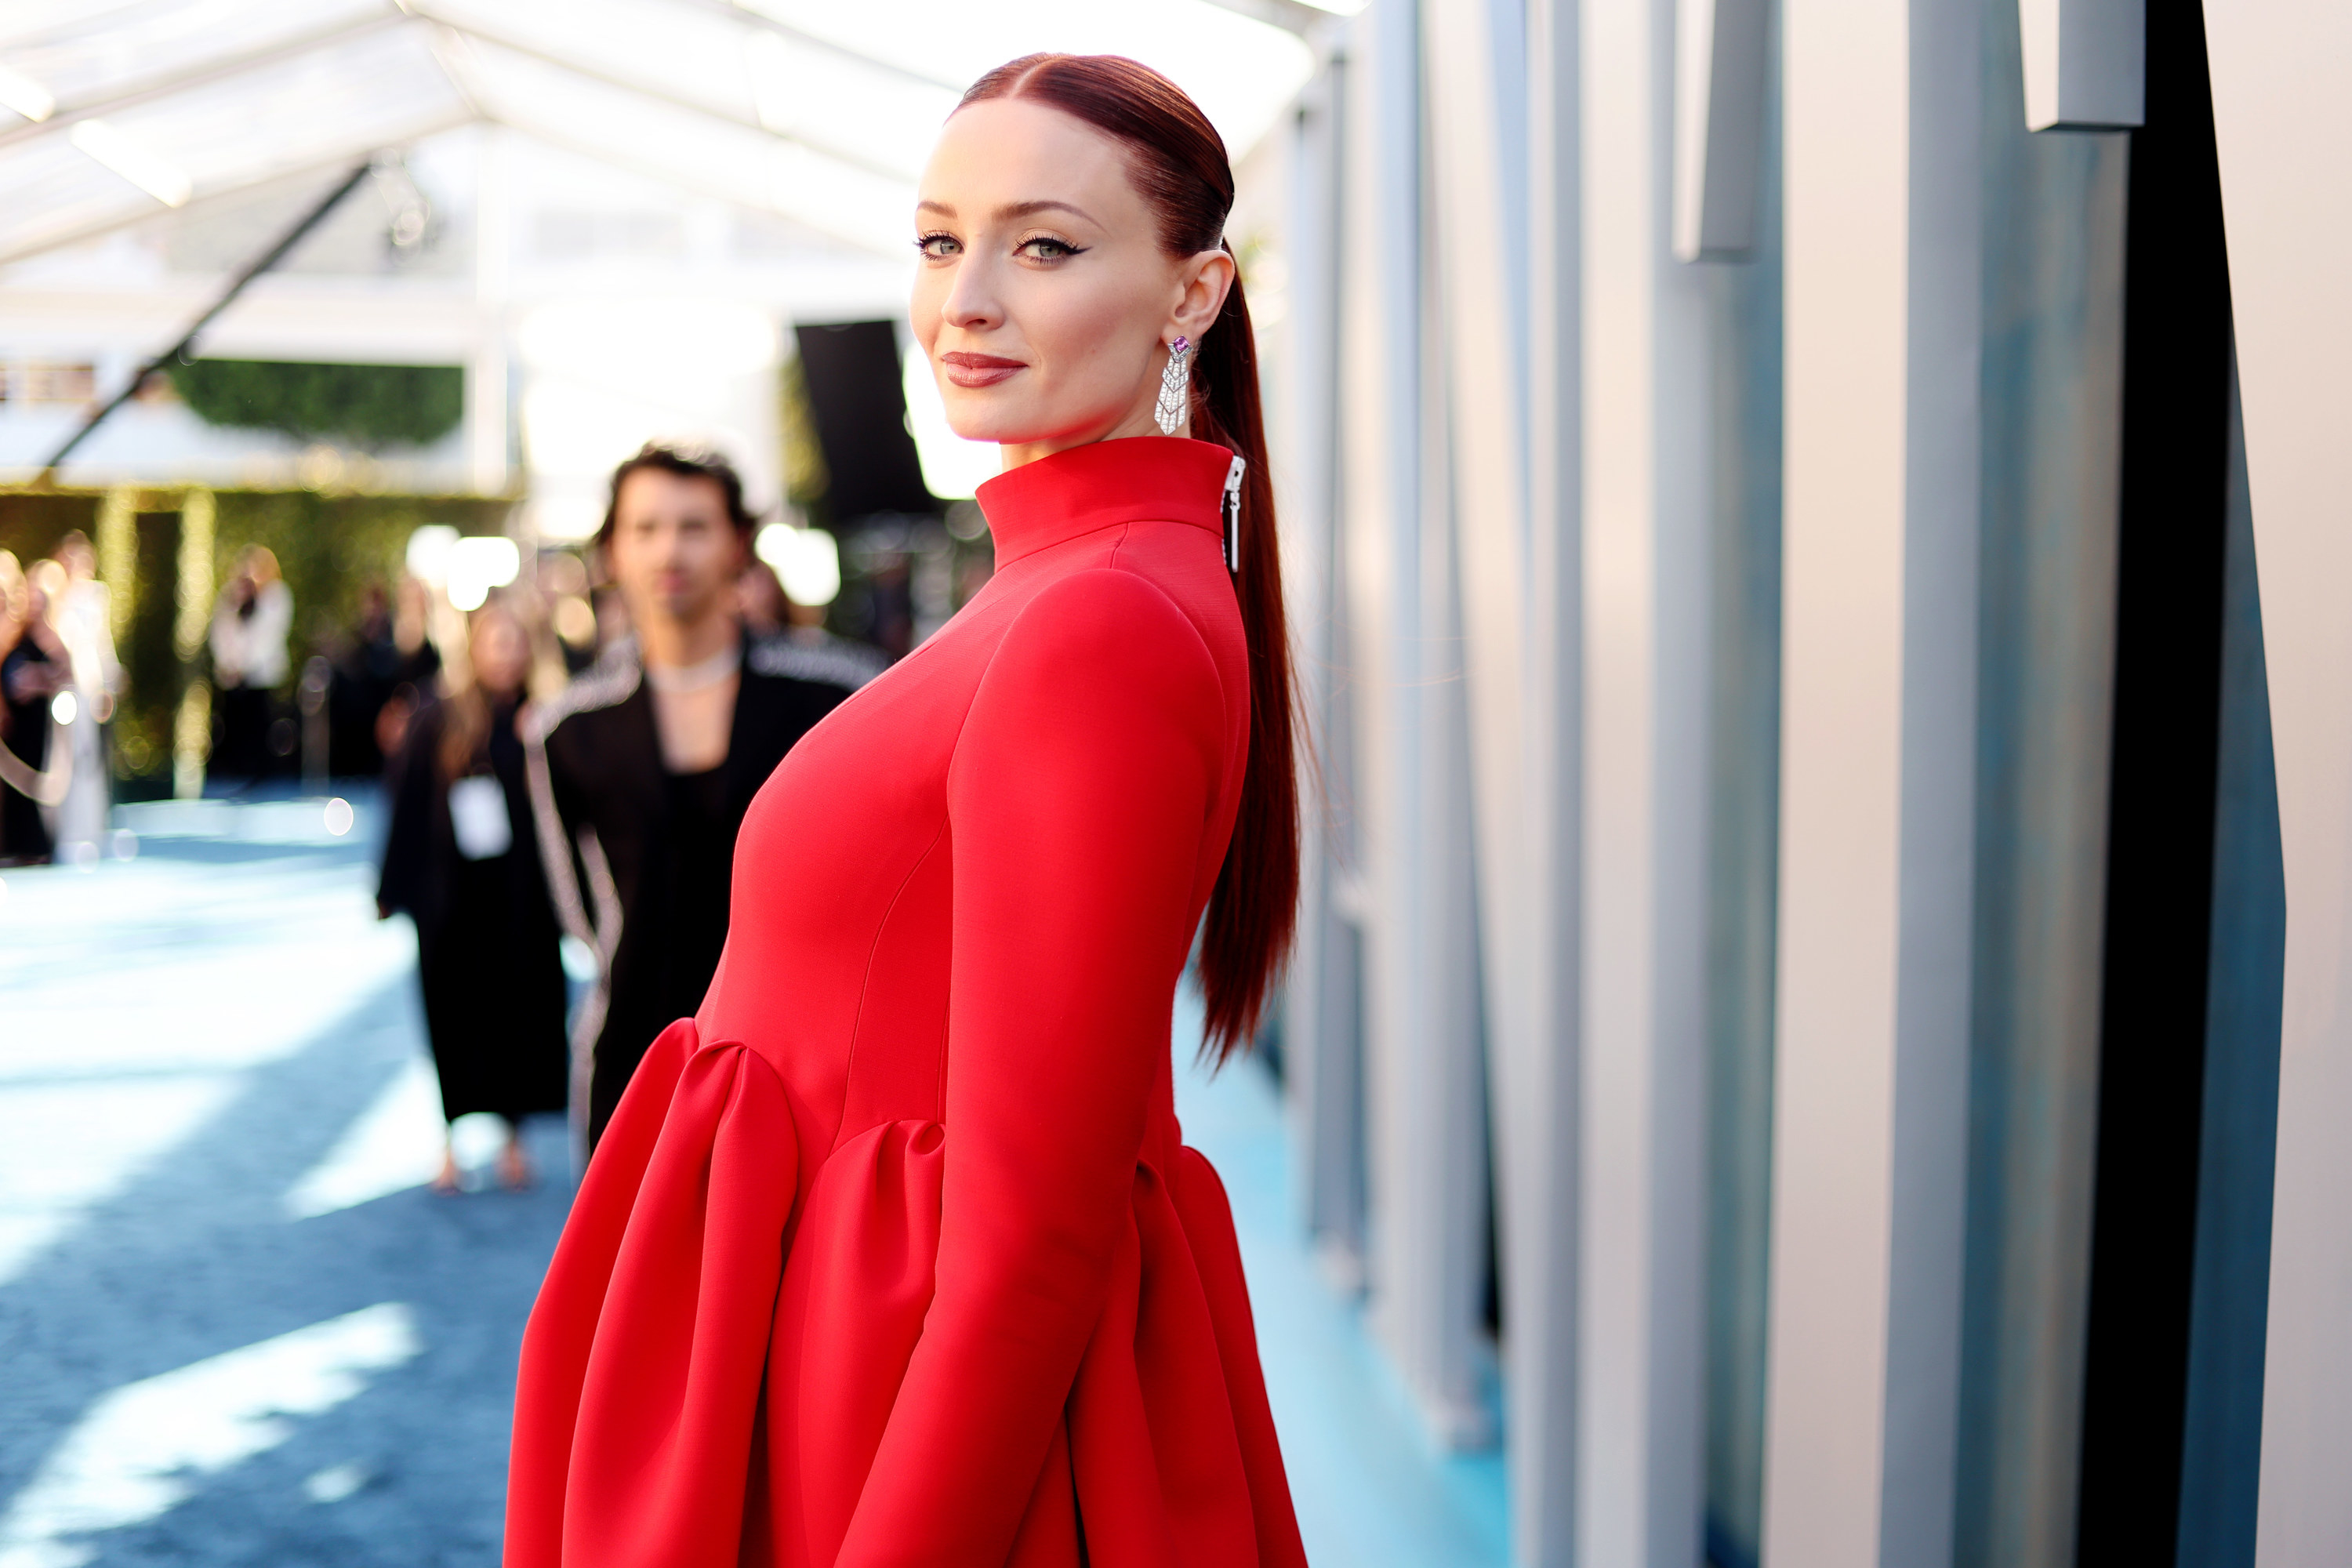 Sophie Turner Shows Post-Baby Body 3 Months After Daughter's Birth